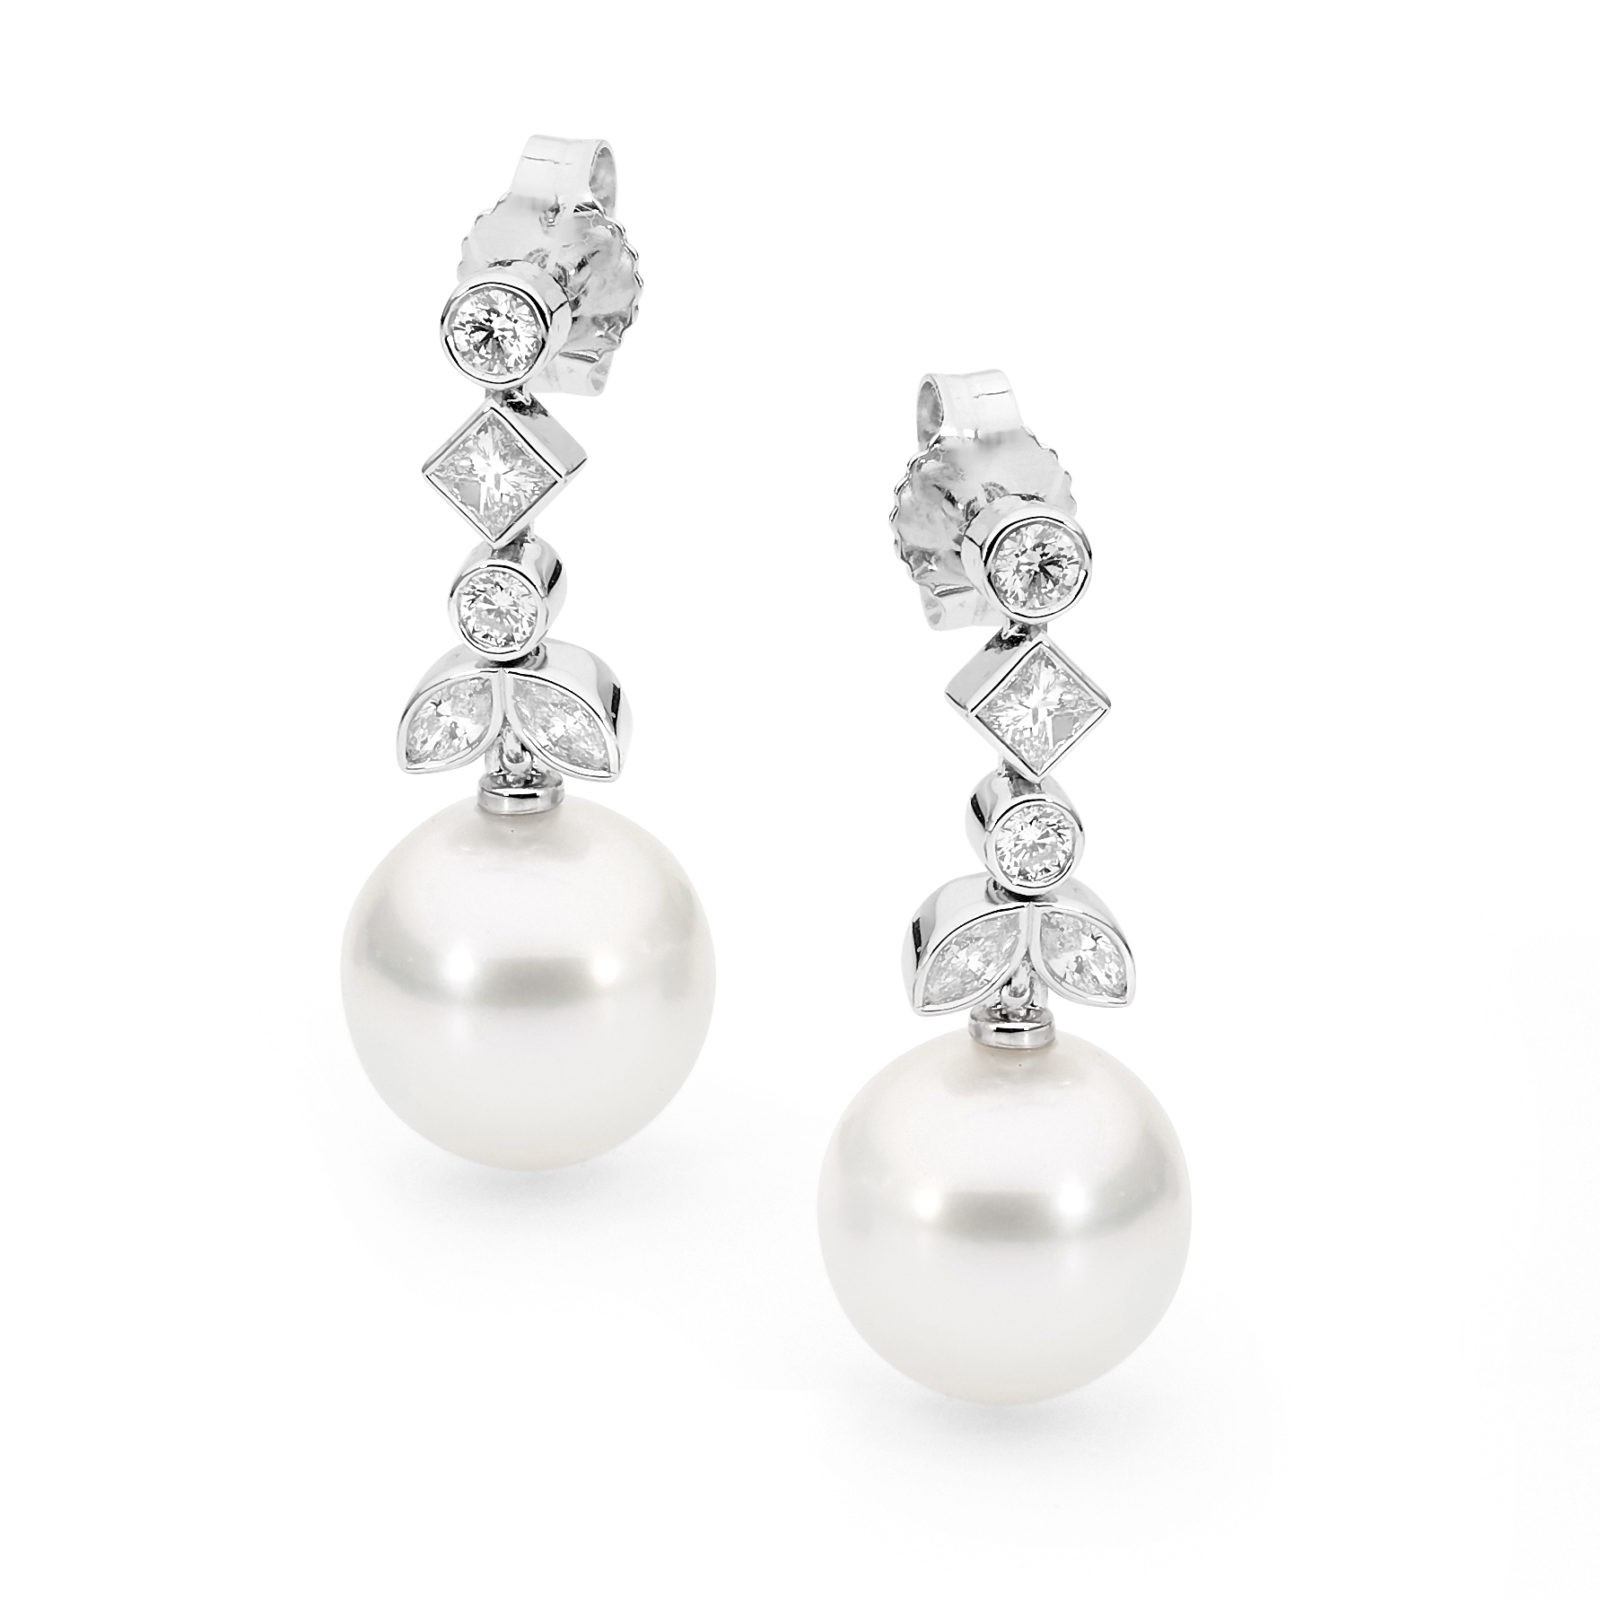 How to Care For Pearls & Pearl Jewellery - Allure South Sea Pearls